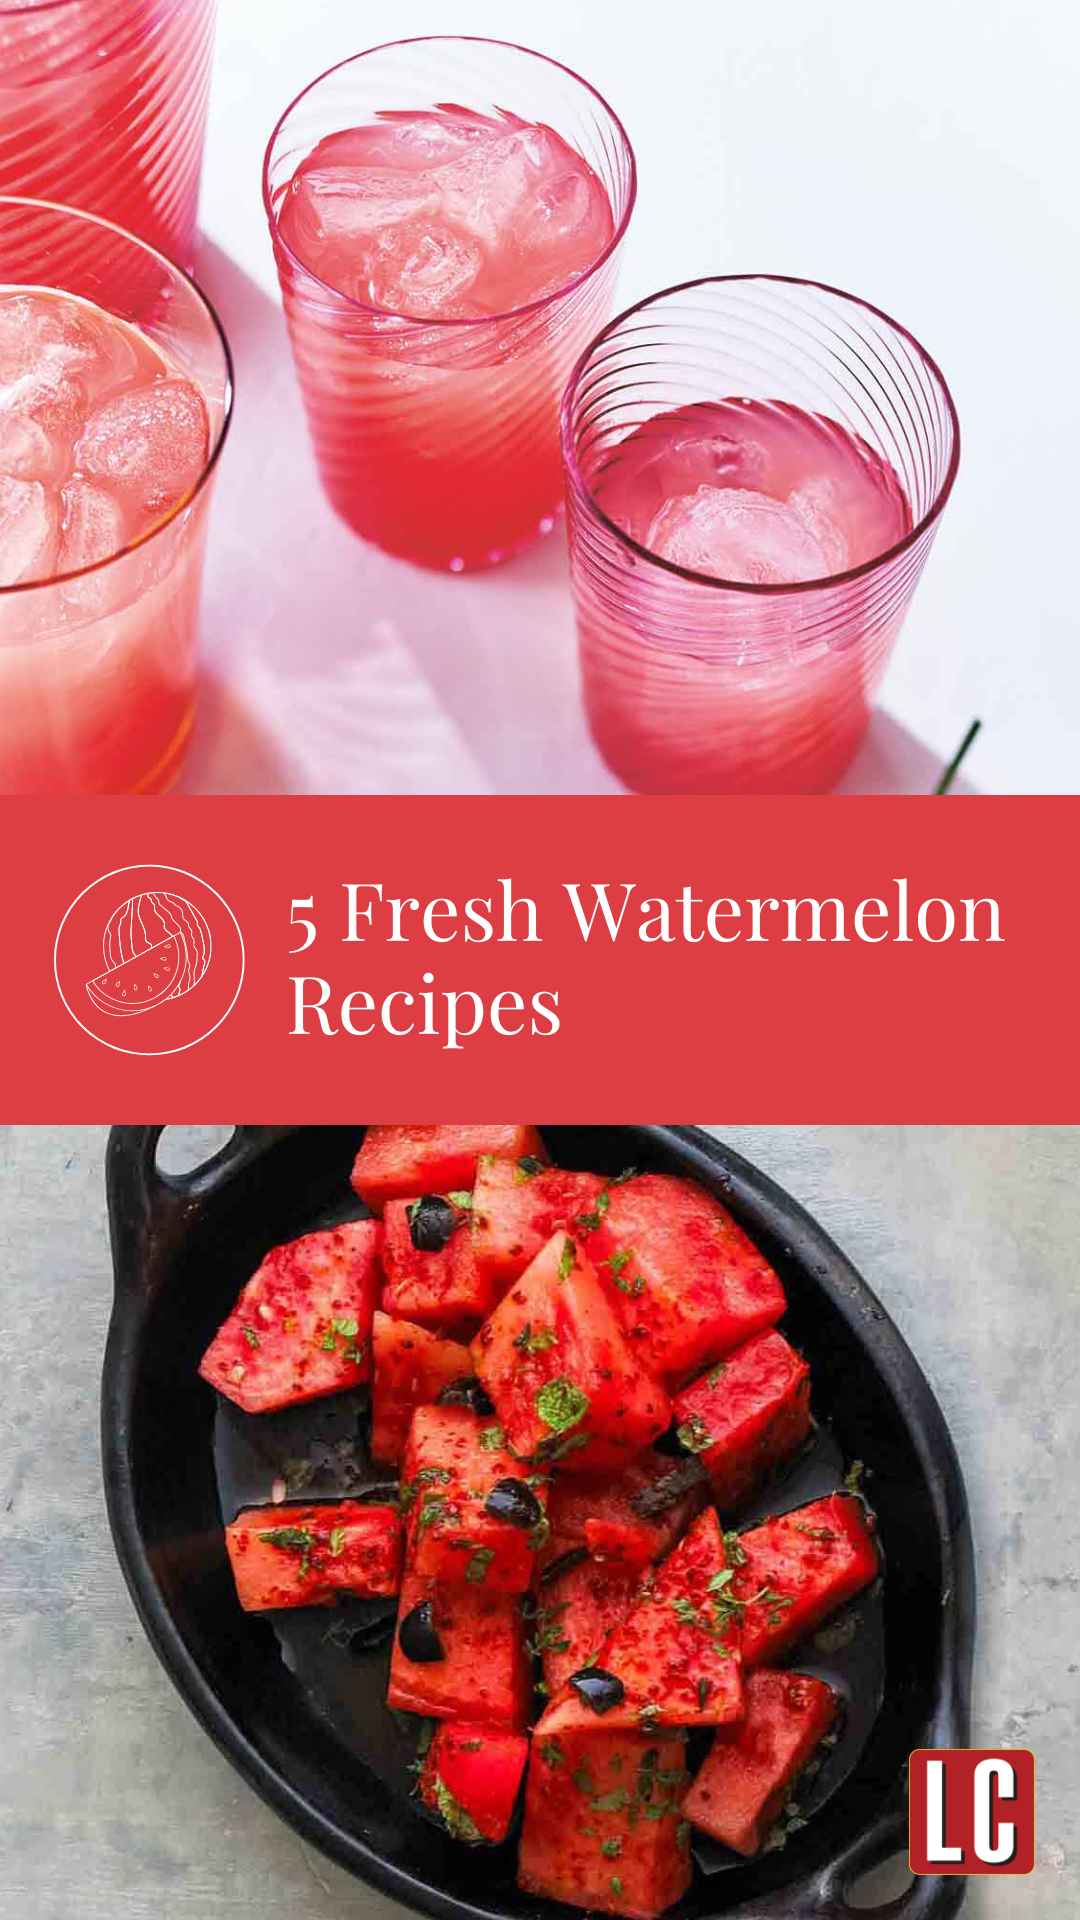 Several glasses of watermelon lemonade and a black dish filled with cubed watermelon salad, olives, and mint leaves.